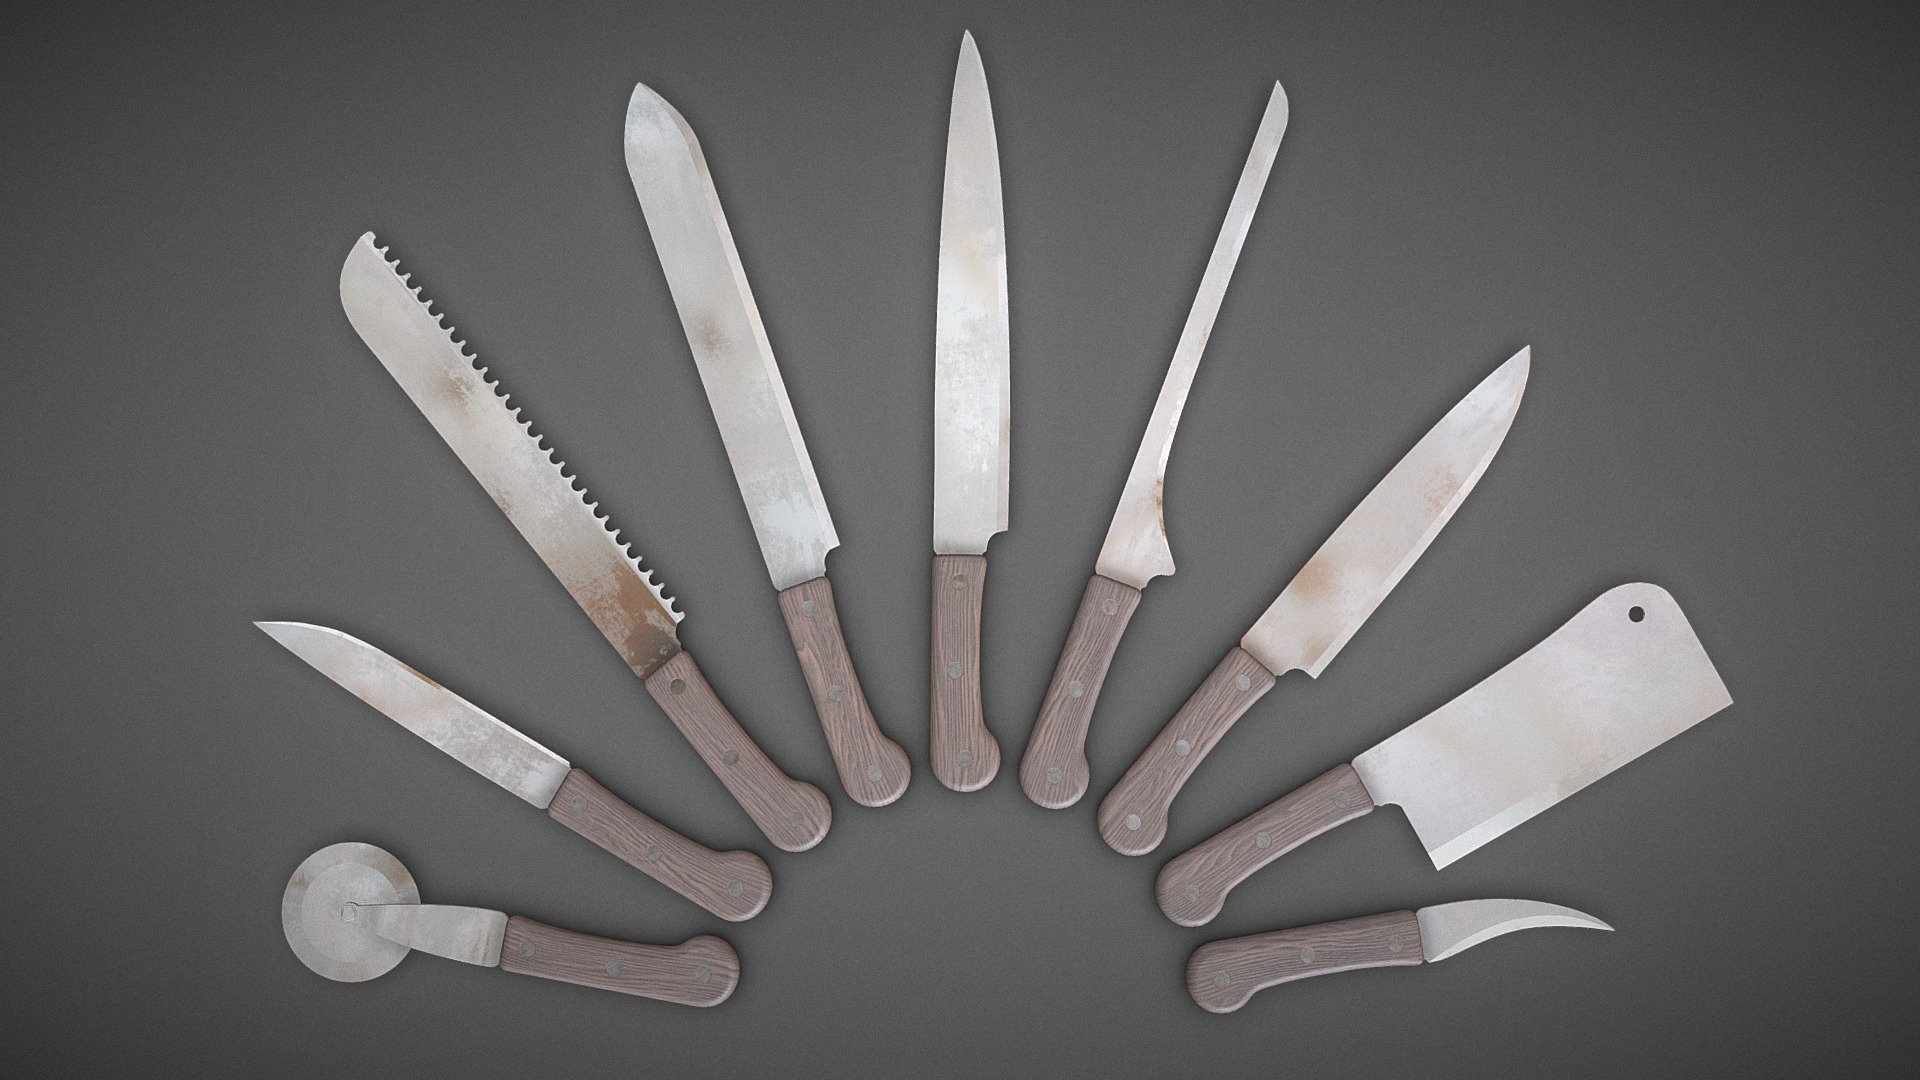 Knifes, modeled in Blender, can be used in architectural house animations, architectural visualization(Arch Viz).

Includes seven different types of knifes:




Pizza cutter

Vegetable cutting knife

Bread cutting knife

Spatula knife

Cook's knife

Fillet knife

Universal knife

Butcher knife

Peel knife




✅ PBR (metalness)

✅ diffuse

✅ roughness

✅ normal

✅ metalness

✅ UV unwrapped

✅ 2K textures (2048x2048)




If you find this 3D model useful, please consider supporting by purchasing my store models,

thank you:)
https://sketchfab.com/Helindu/store - Knife collection - Download Free 3D model by Helindu 3d model